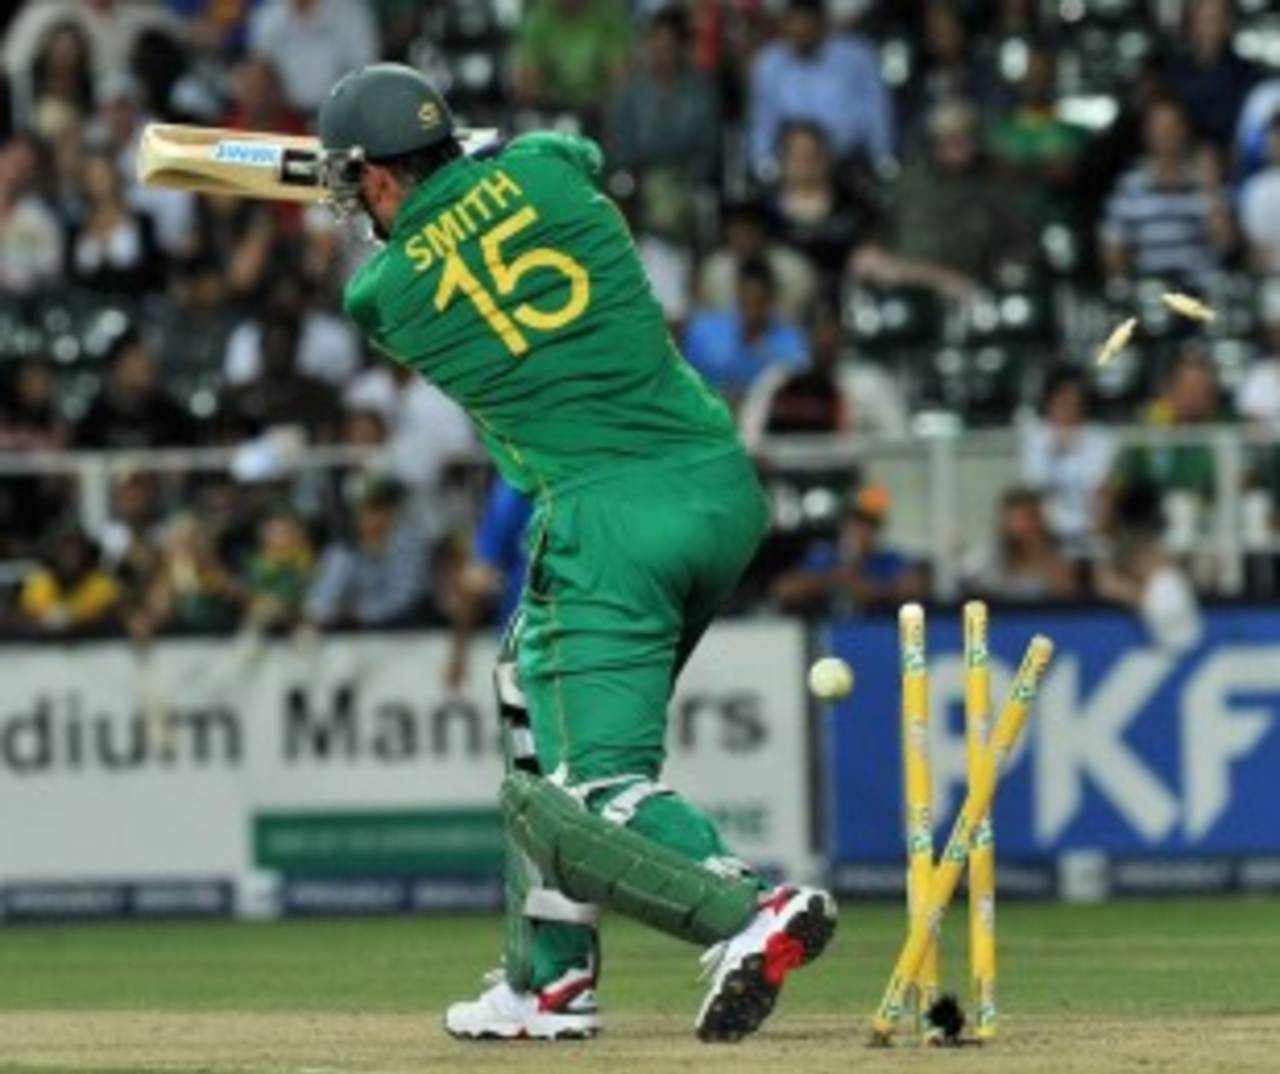 Graeme Smith was bowled for 77, South Africa v India, 2nd ODI, Johannesburg, January 15, 2011